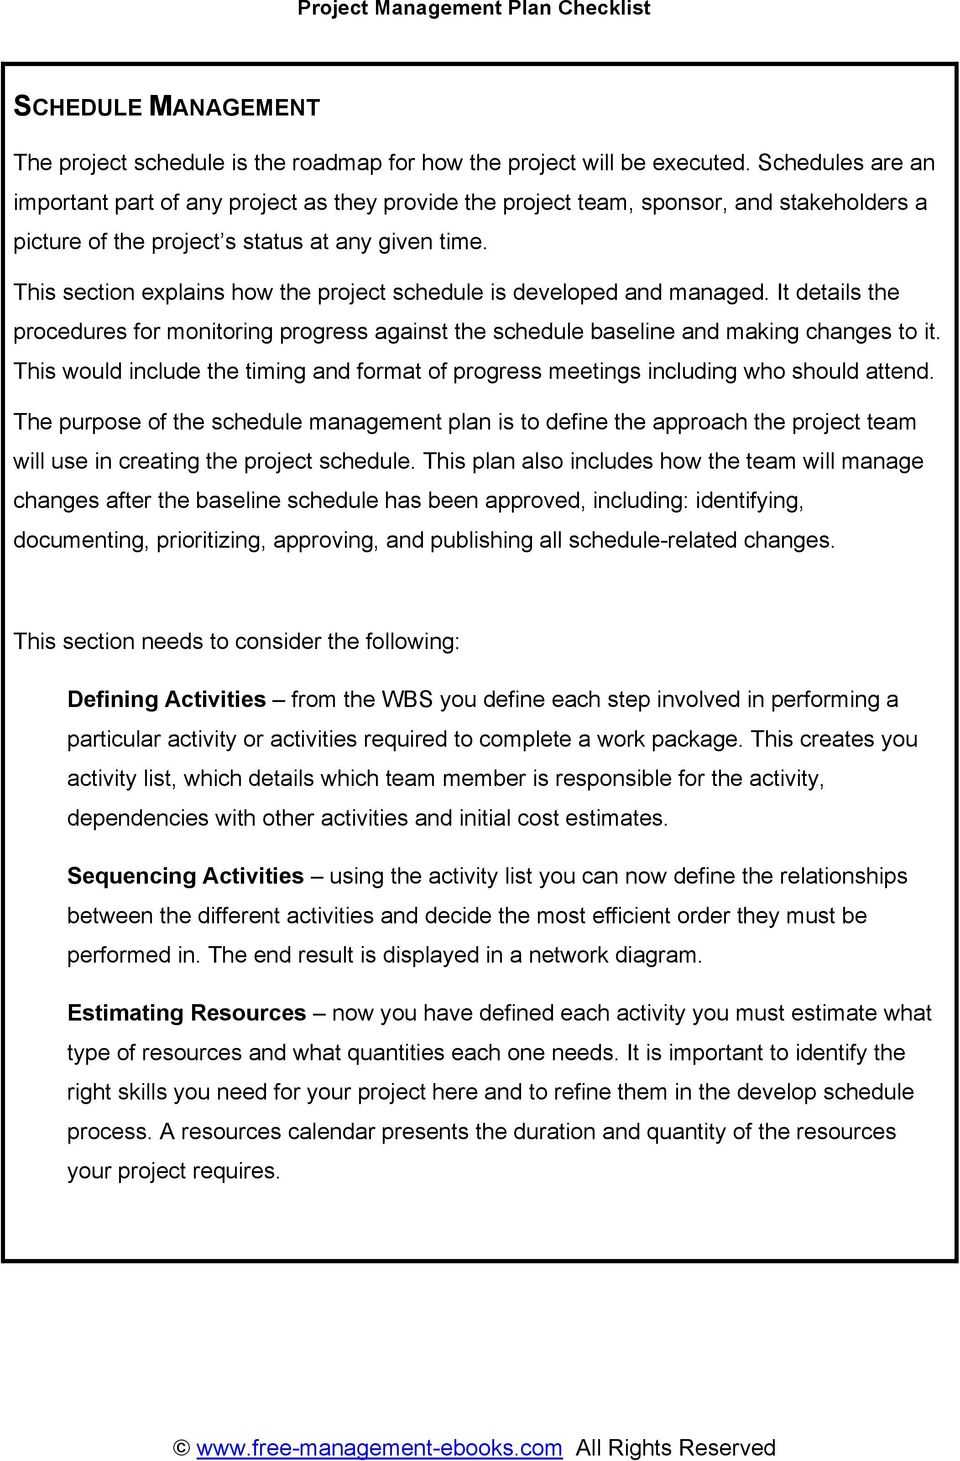 This section explains how the project schedule is developed and managed. It details the procedures for monitoring progress against the schedule baseline and making changes to it.